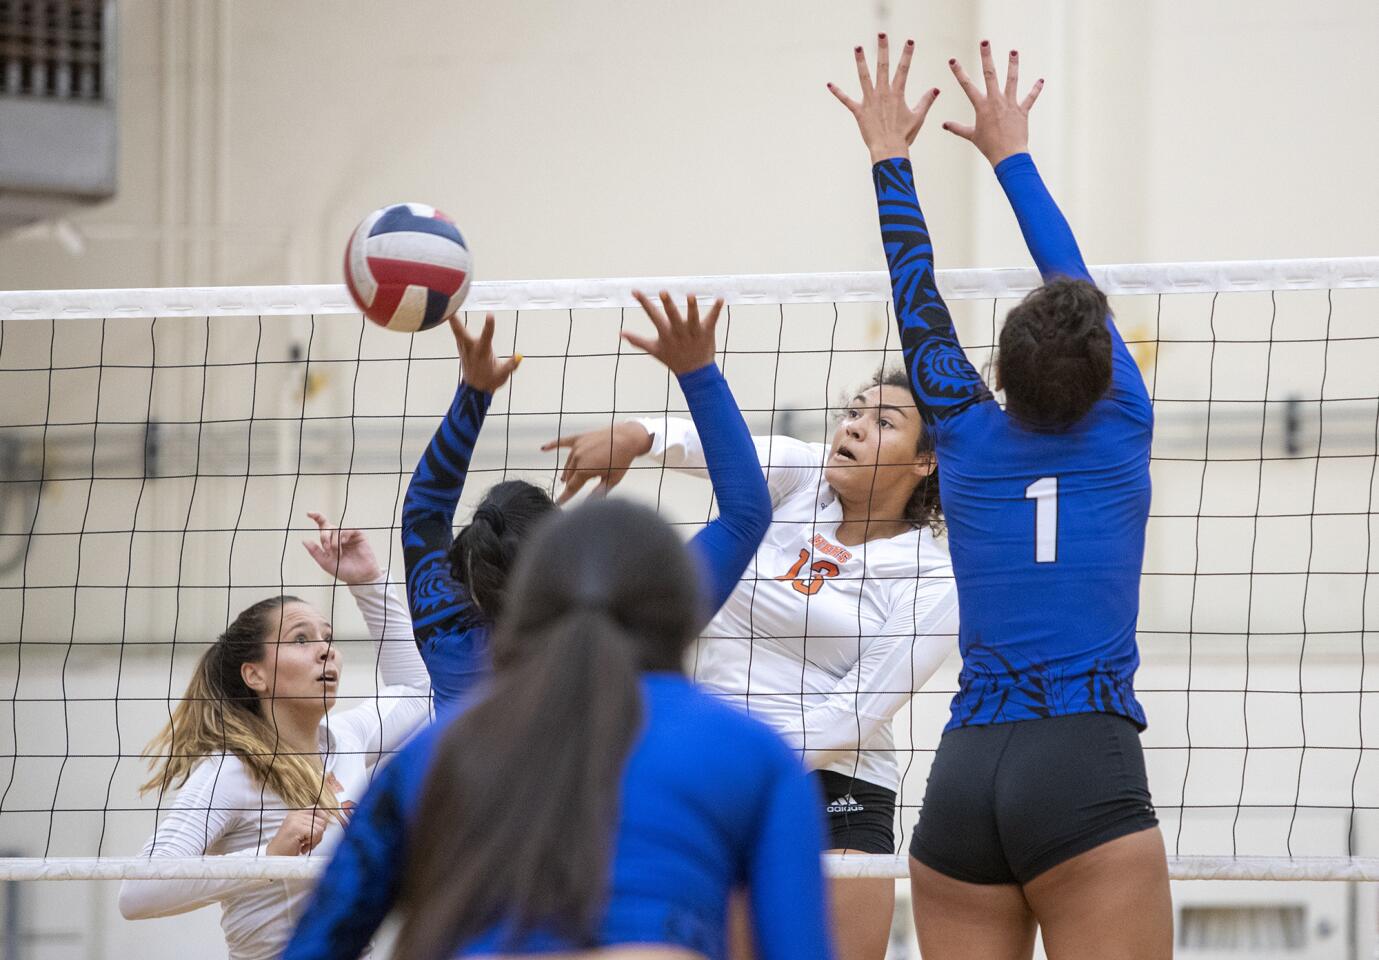 Huntington Beach's Olivia Carlton hits against Bingham's Journey Tupea, left, and Jada Suguturaga during a match at the Dave Mohs Memorial volleyball tournament at Newport Harbor on Saturday, September 1.